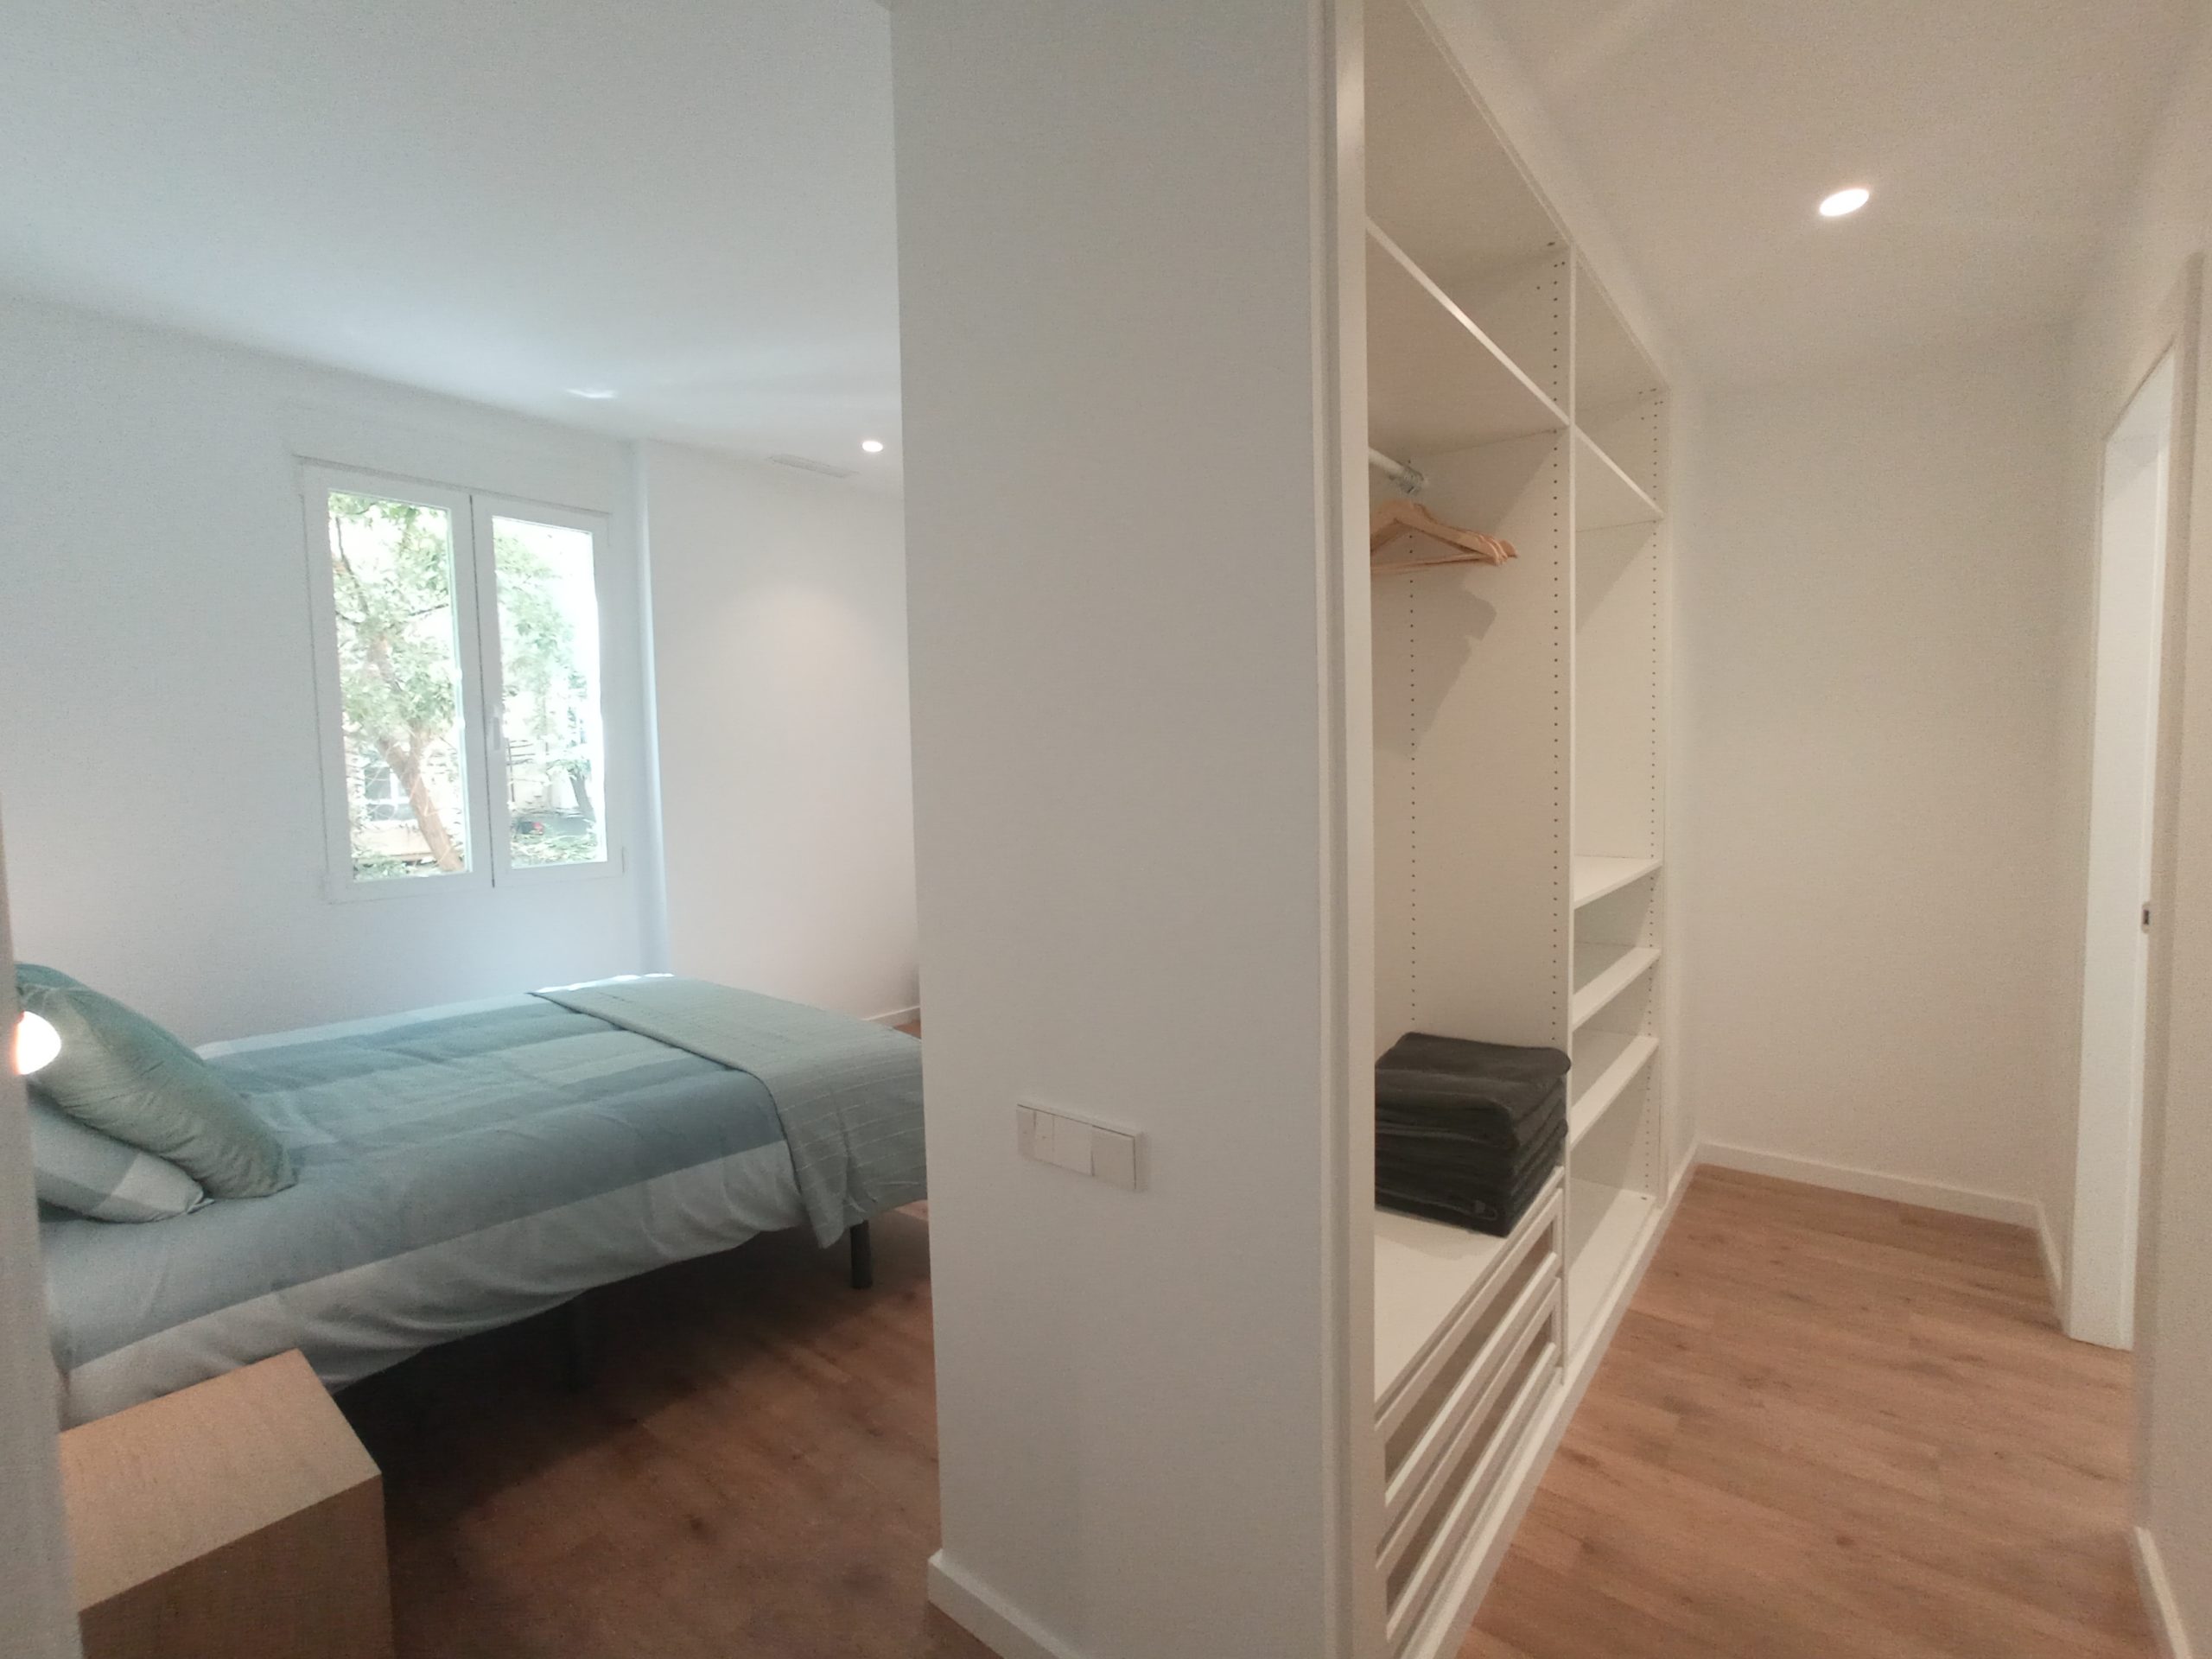 Apartment for rent in Valencia - Bedroom